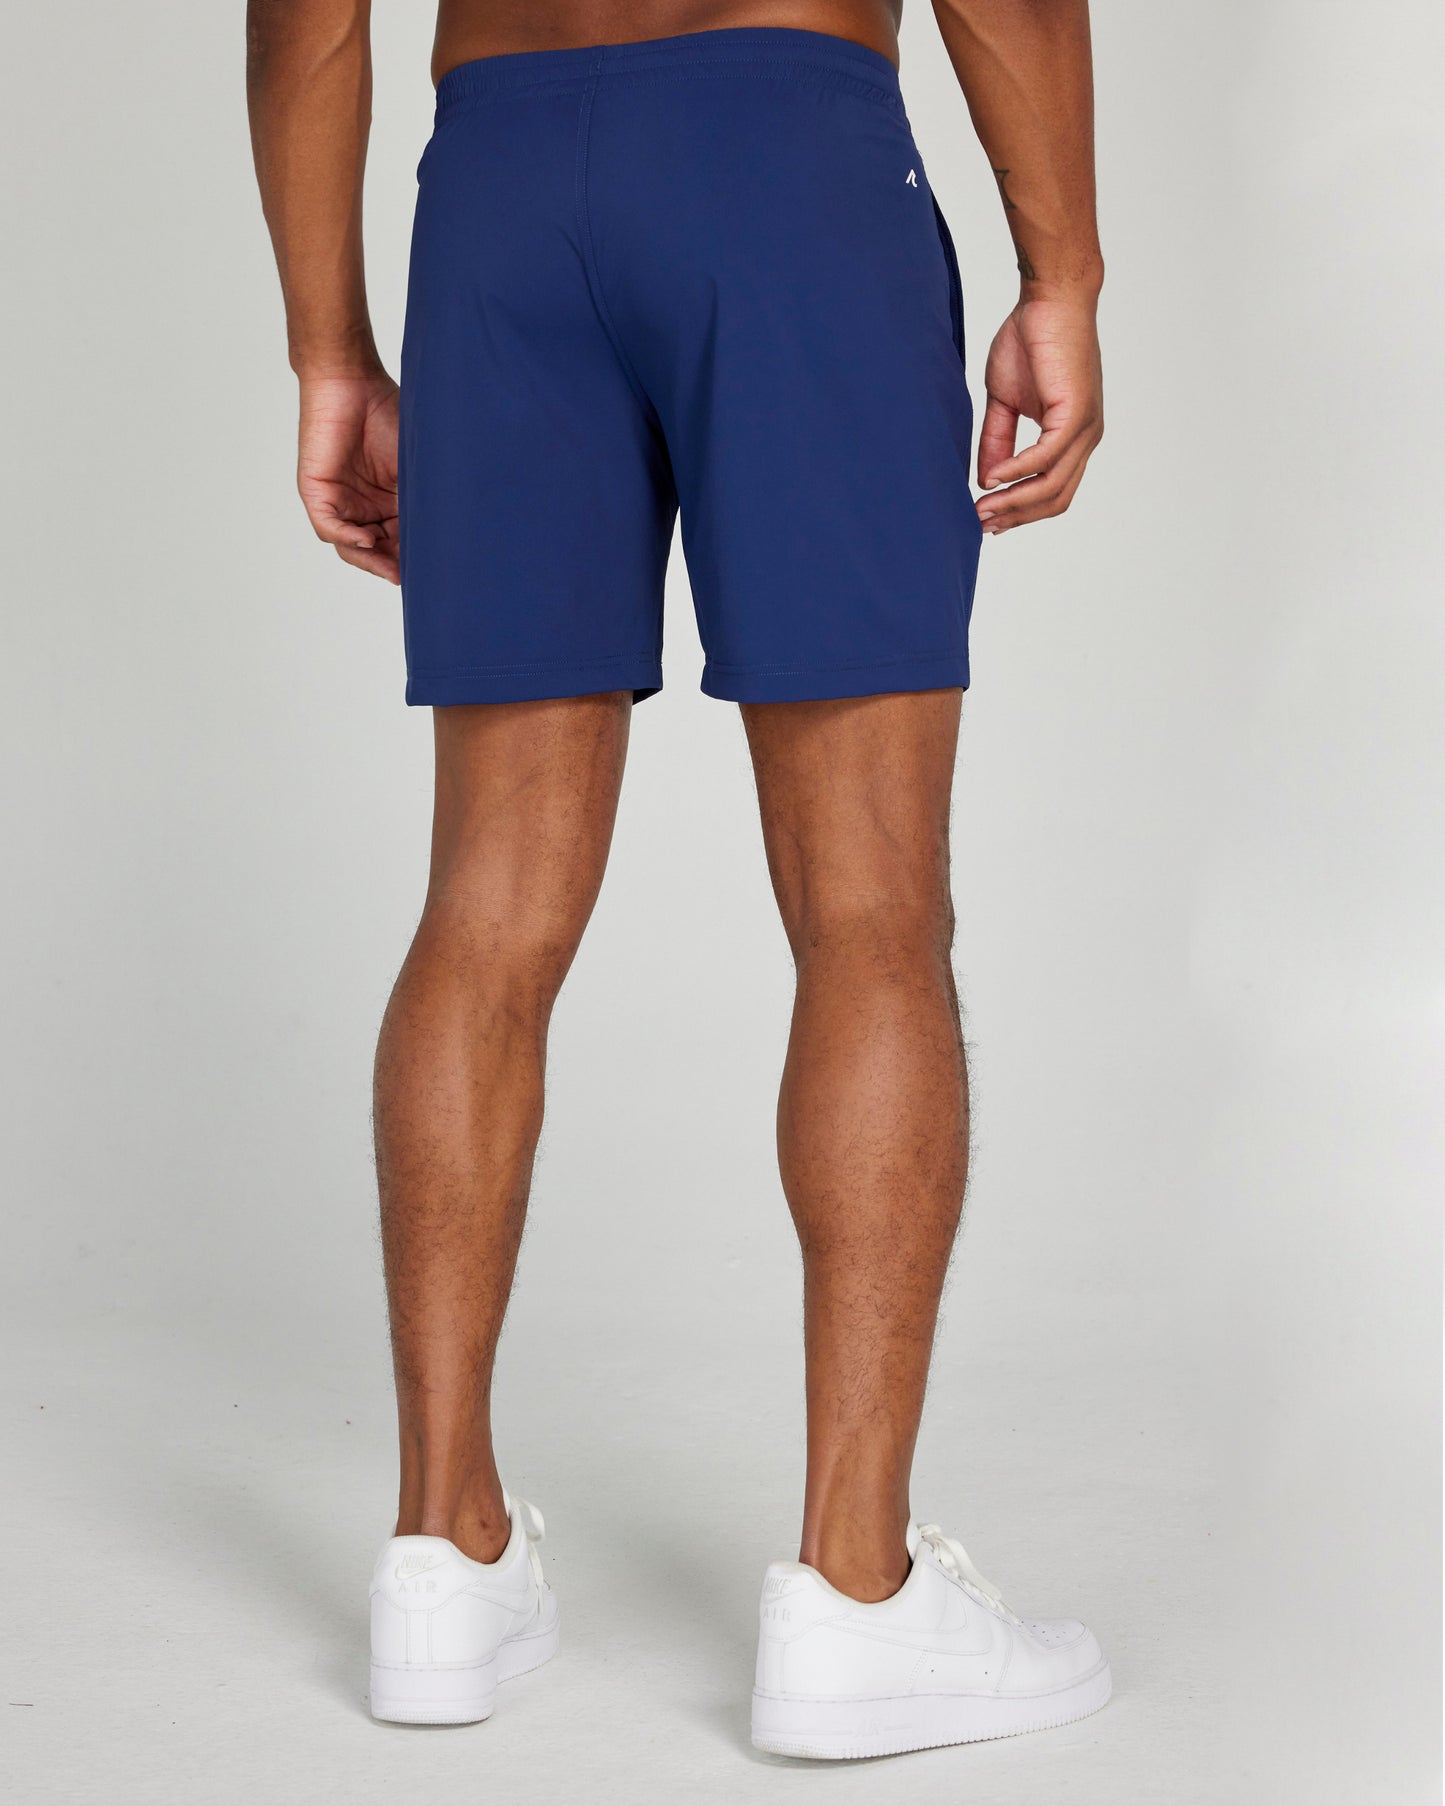 Image of the byron tennis short in navy